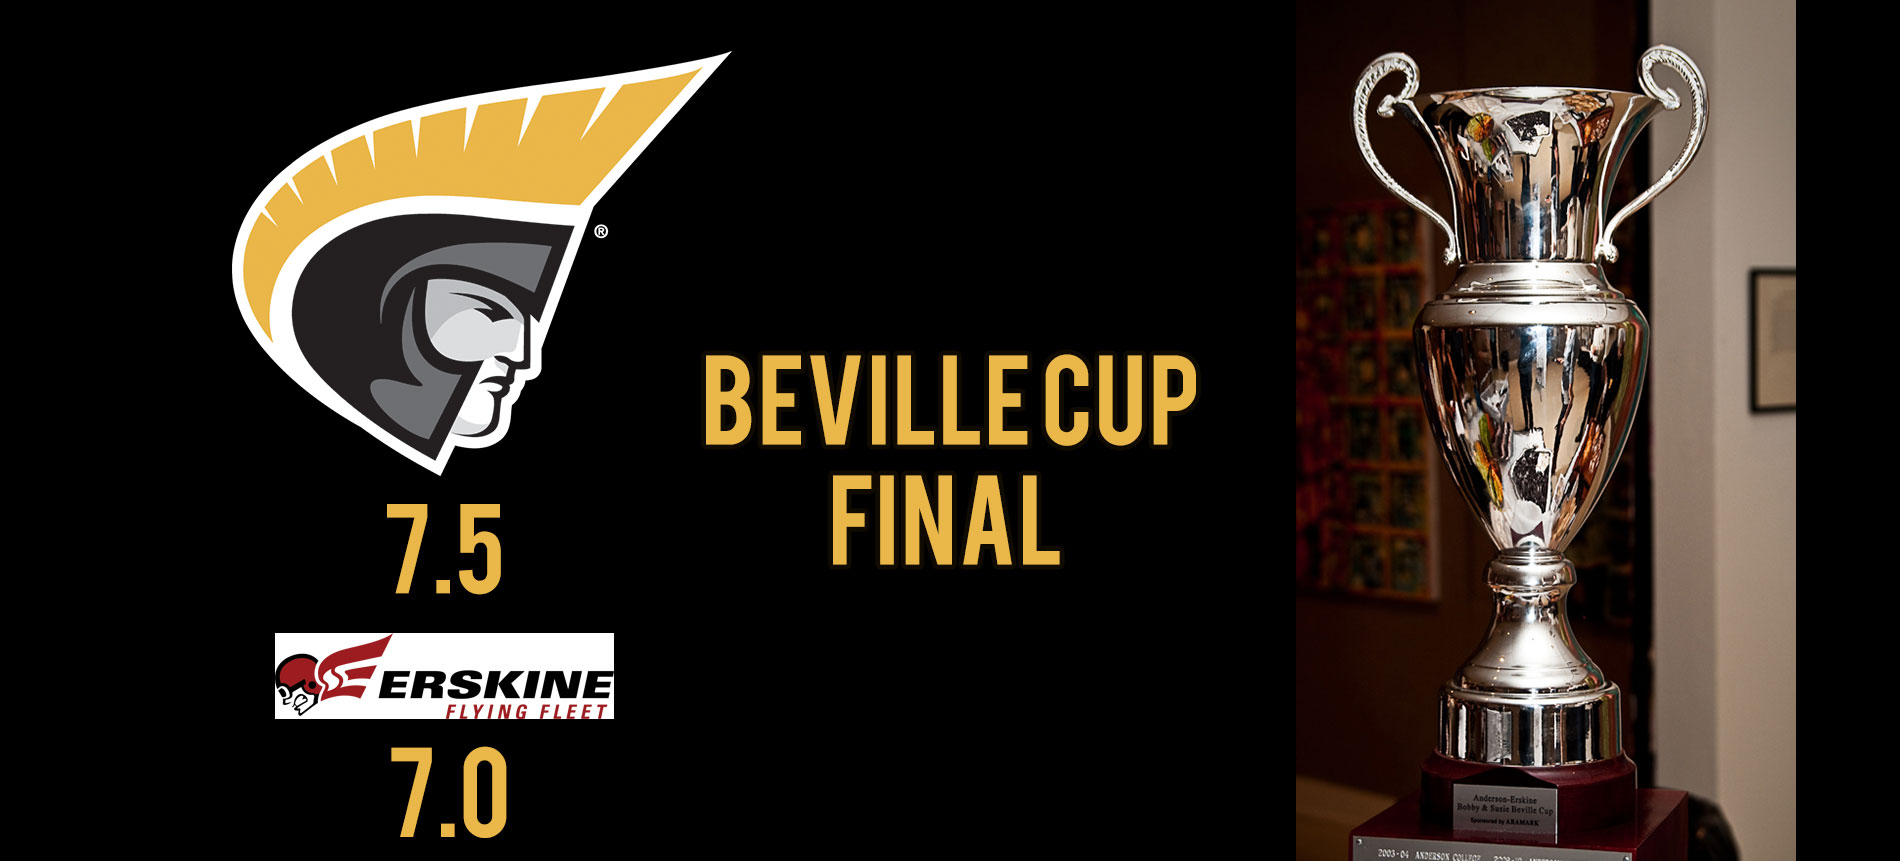 Trojans Retain Possession of Beville Cup for Record Sixth Consecutive Year